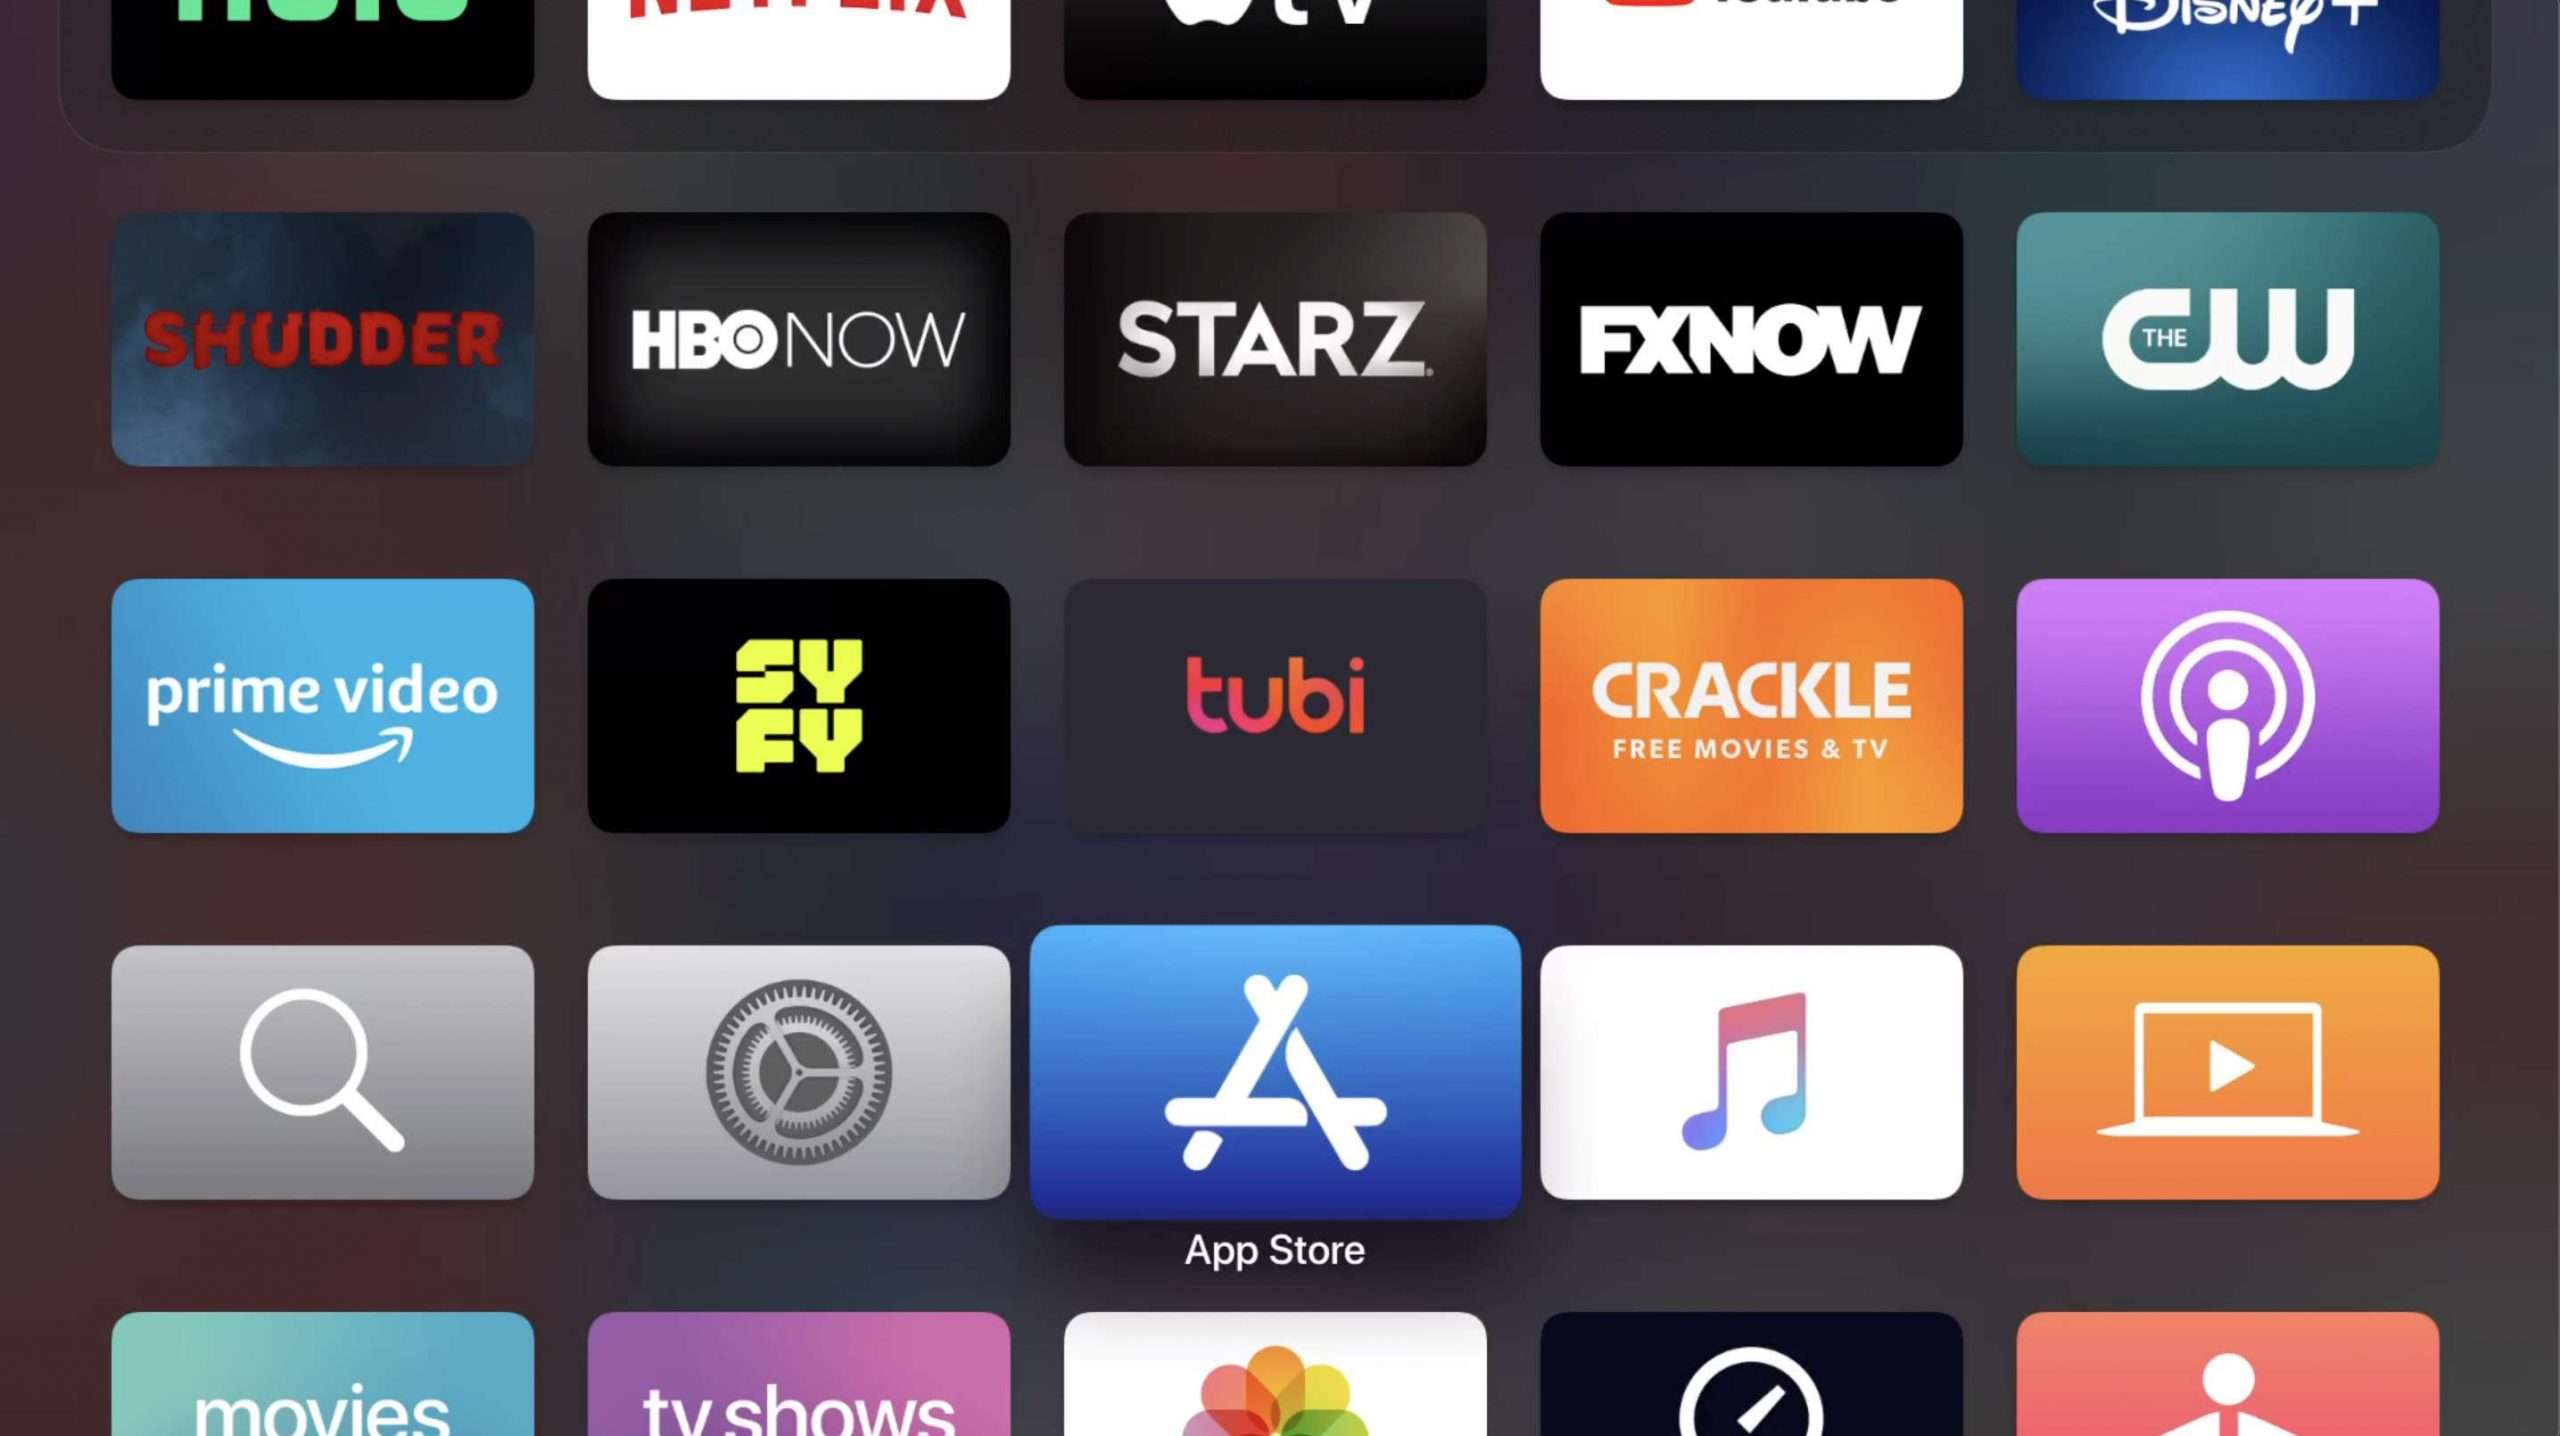 How to Watch Vudu on Apple TV